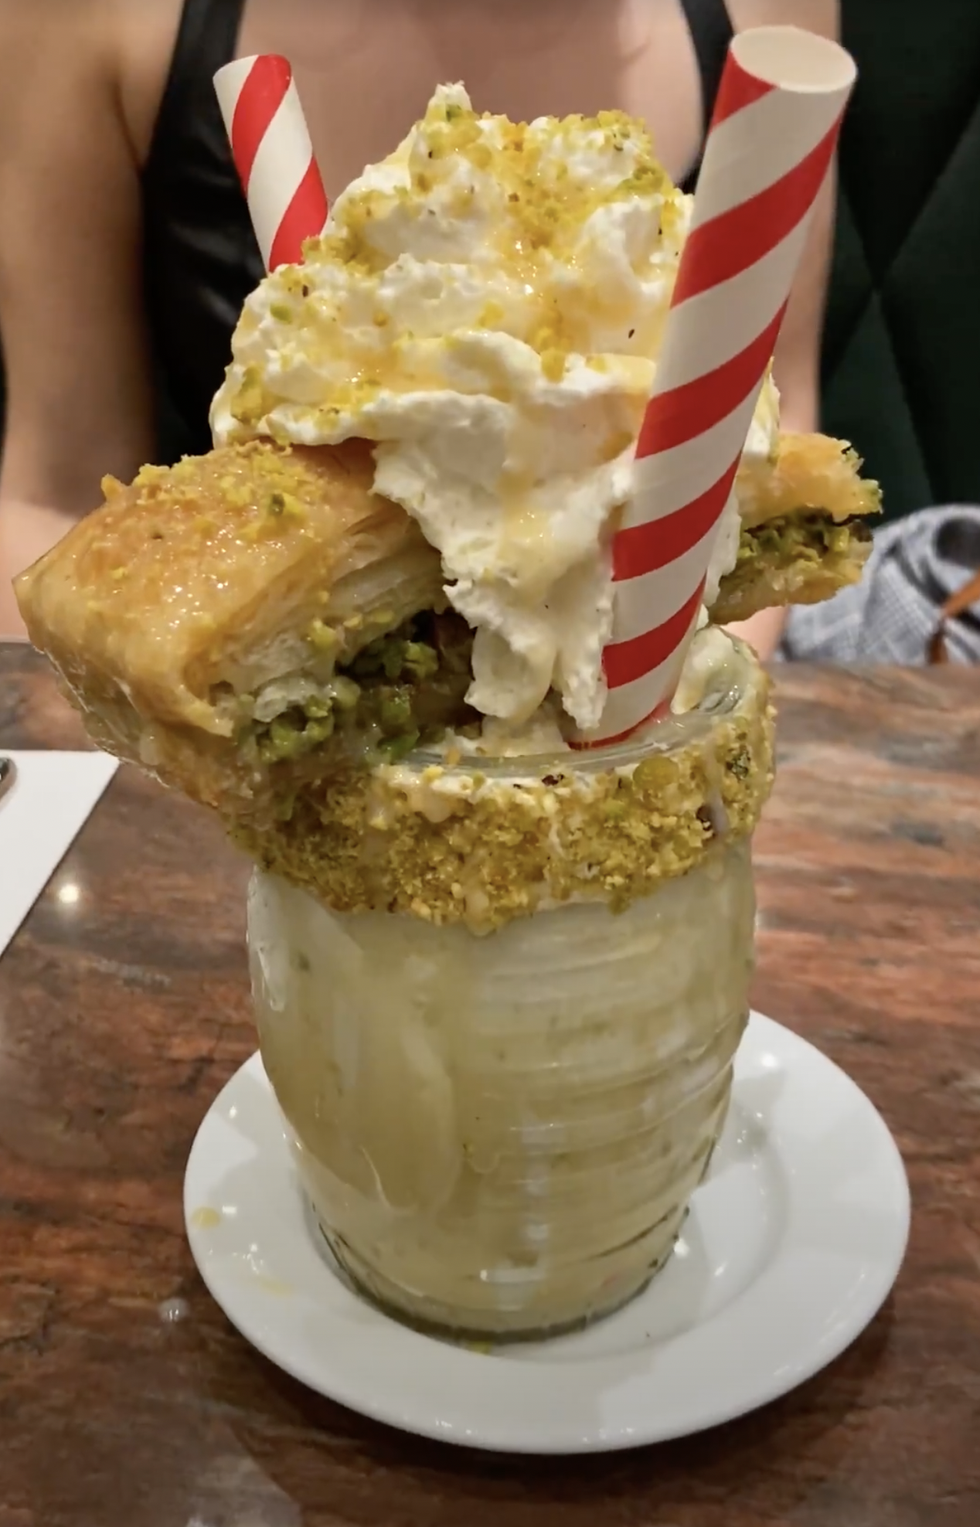 The decadent baklava milkshake, with a giant piece of baklava perched on top